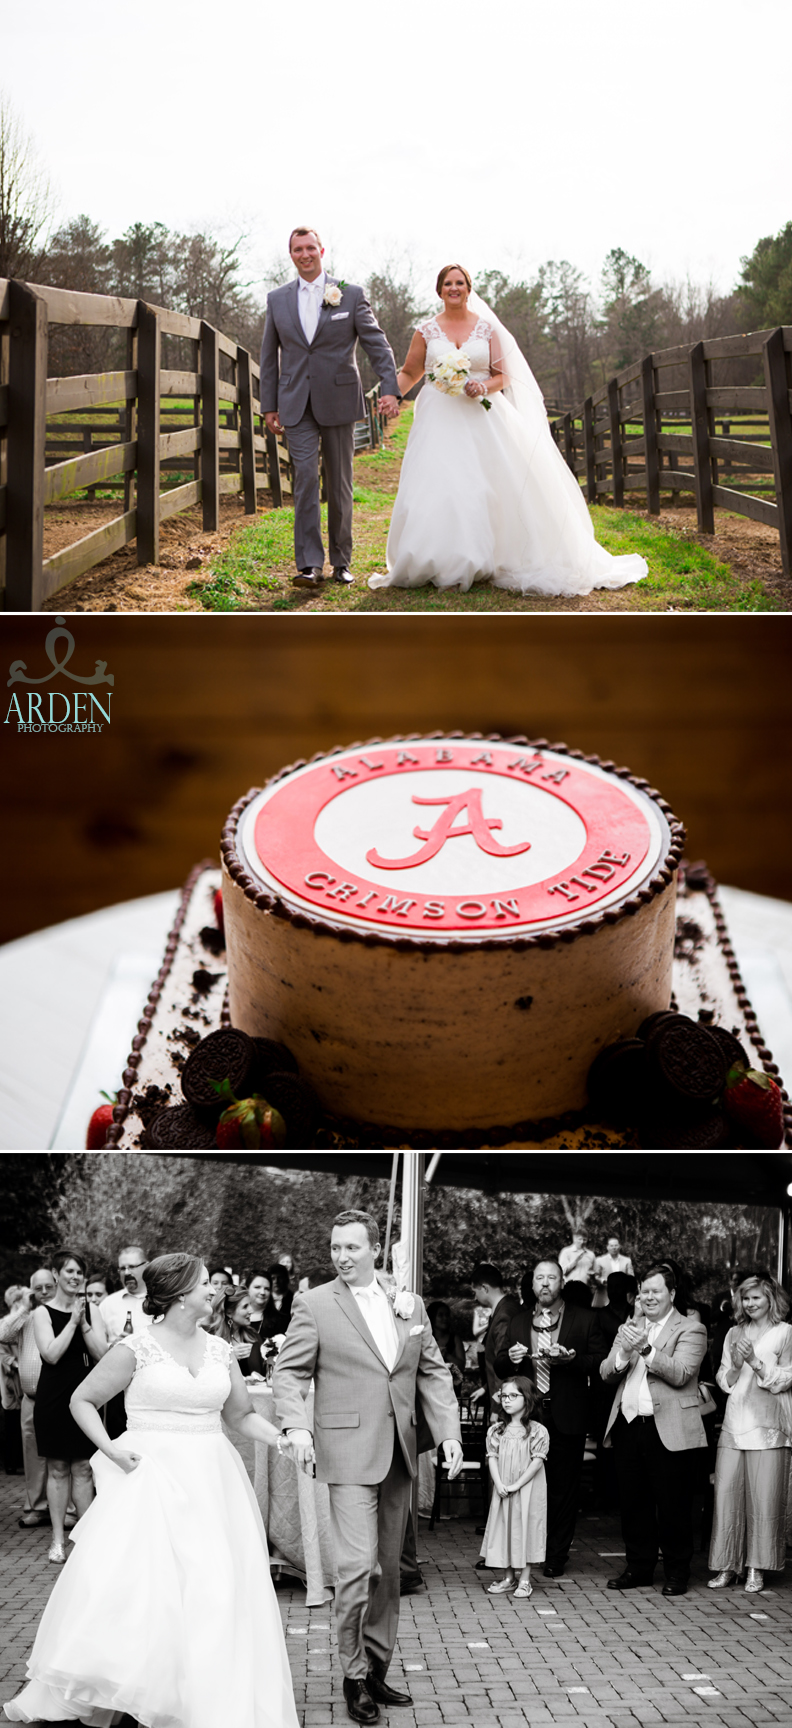  Roll Tide and let’s eat cake! 